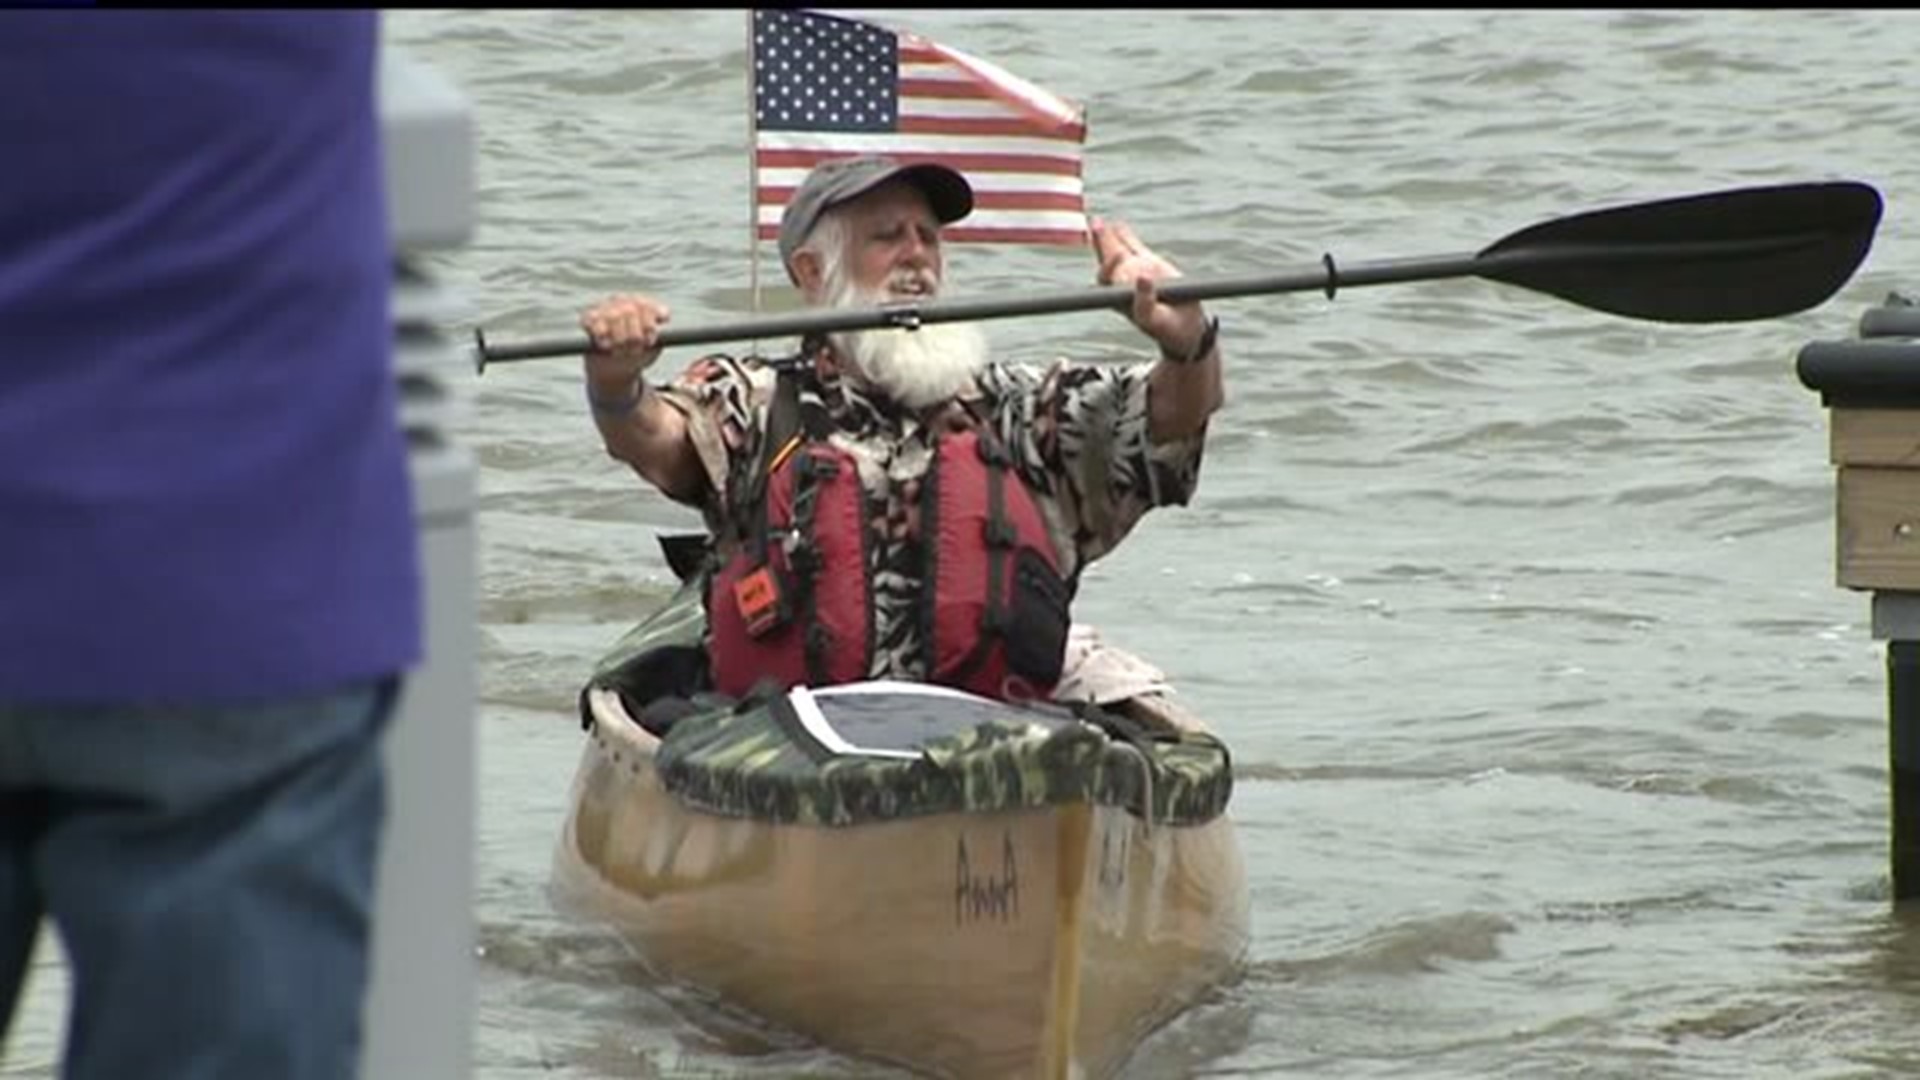 80 Year old Canoeist Trying for Record